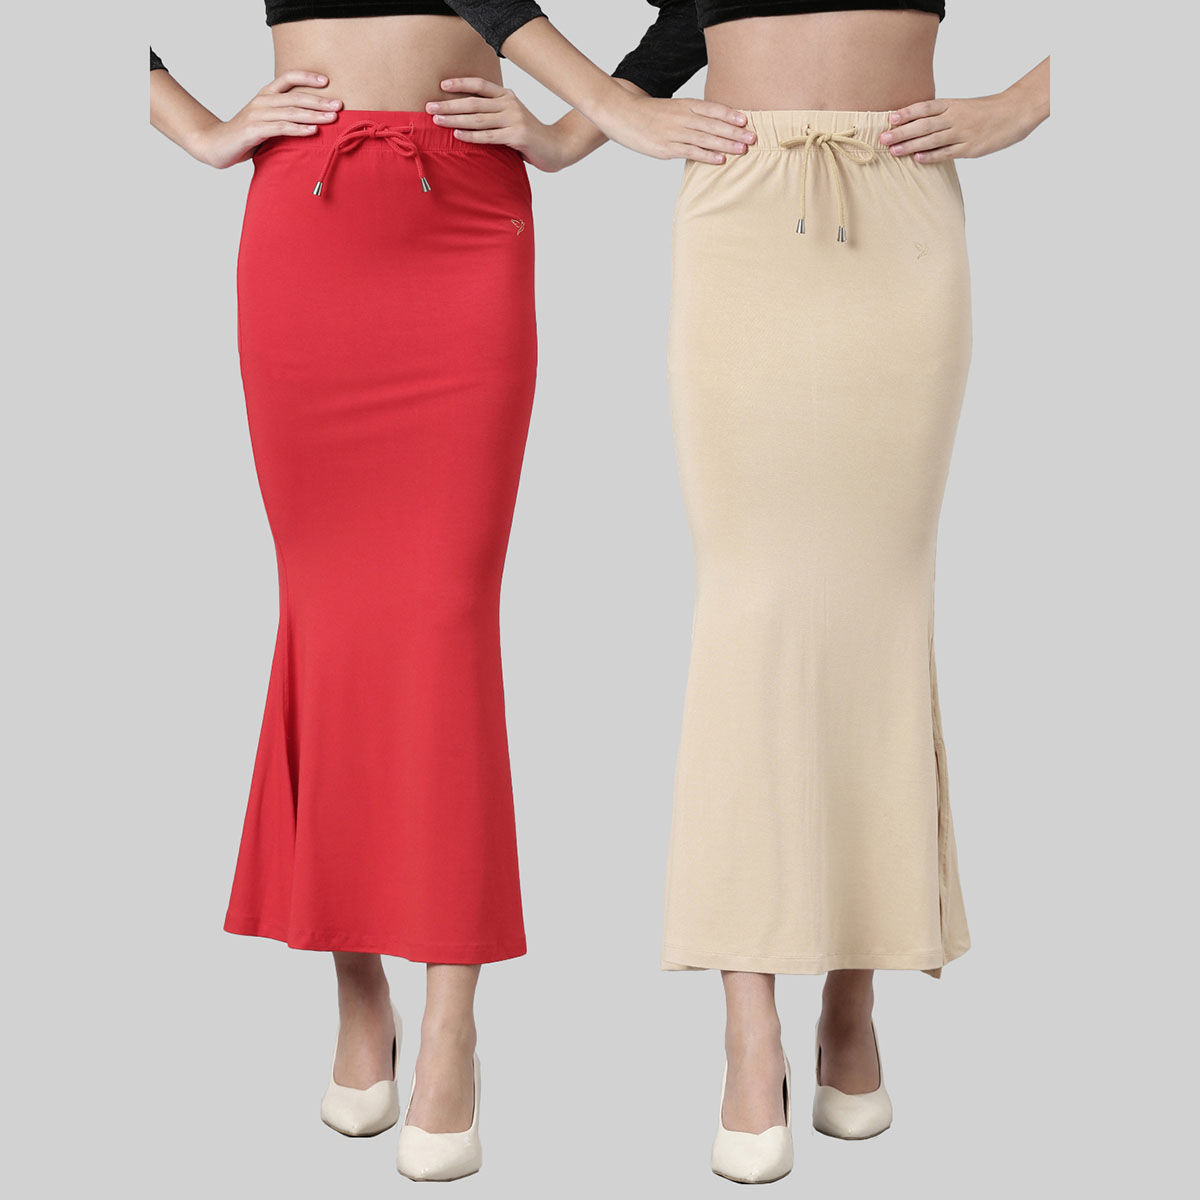 Buy TWIN BIRDS Women Solid Side Slit High Rise Stretchable Viscose Saree  Skirts (Pack of 2) Online